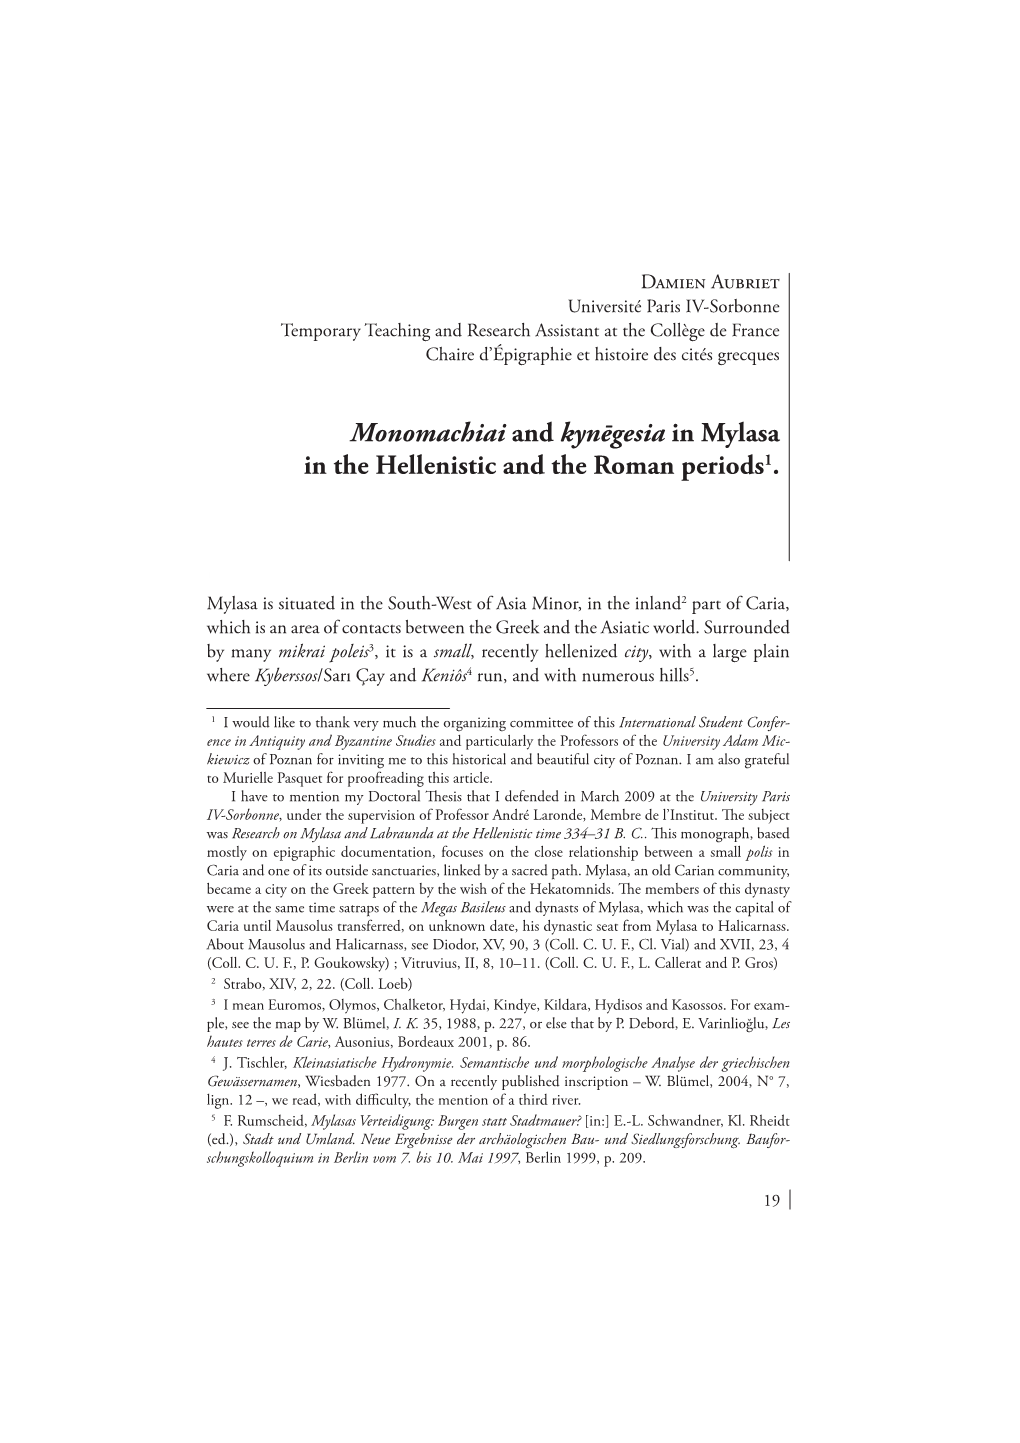 Monomachiai and Kynēgesia in Mylasa in the Hellenistic and the Roman Periods1